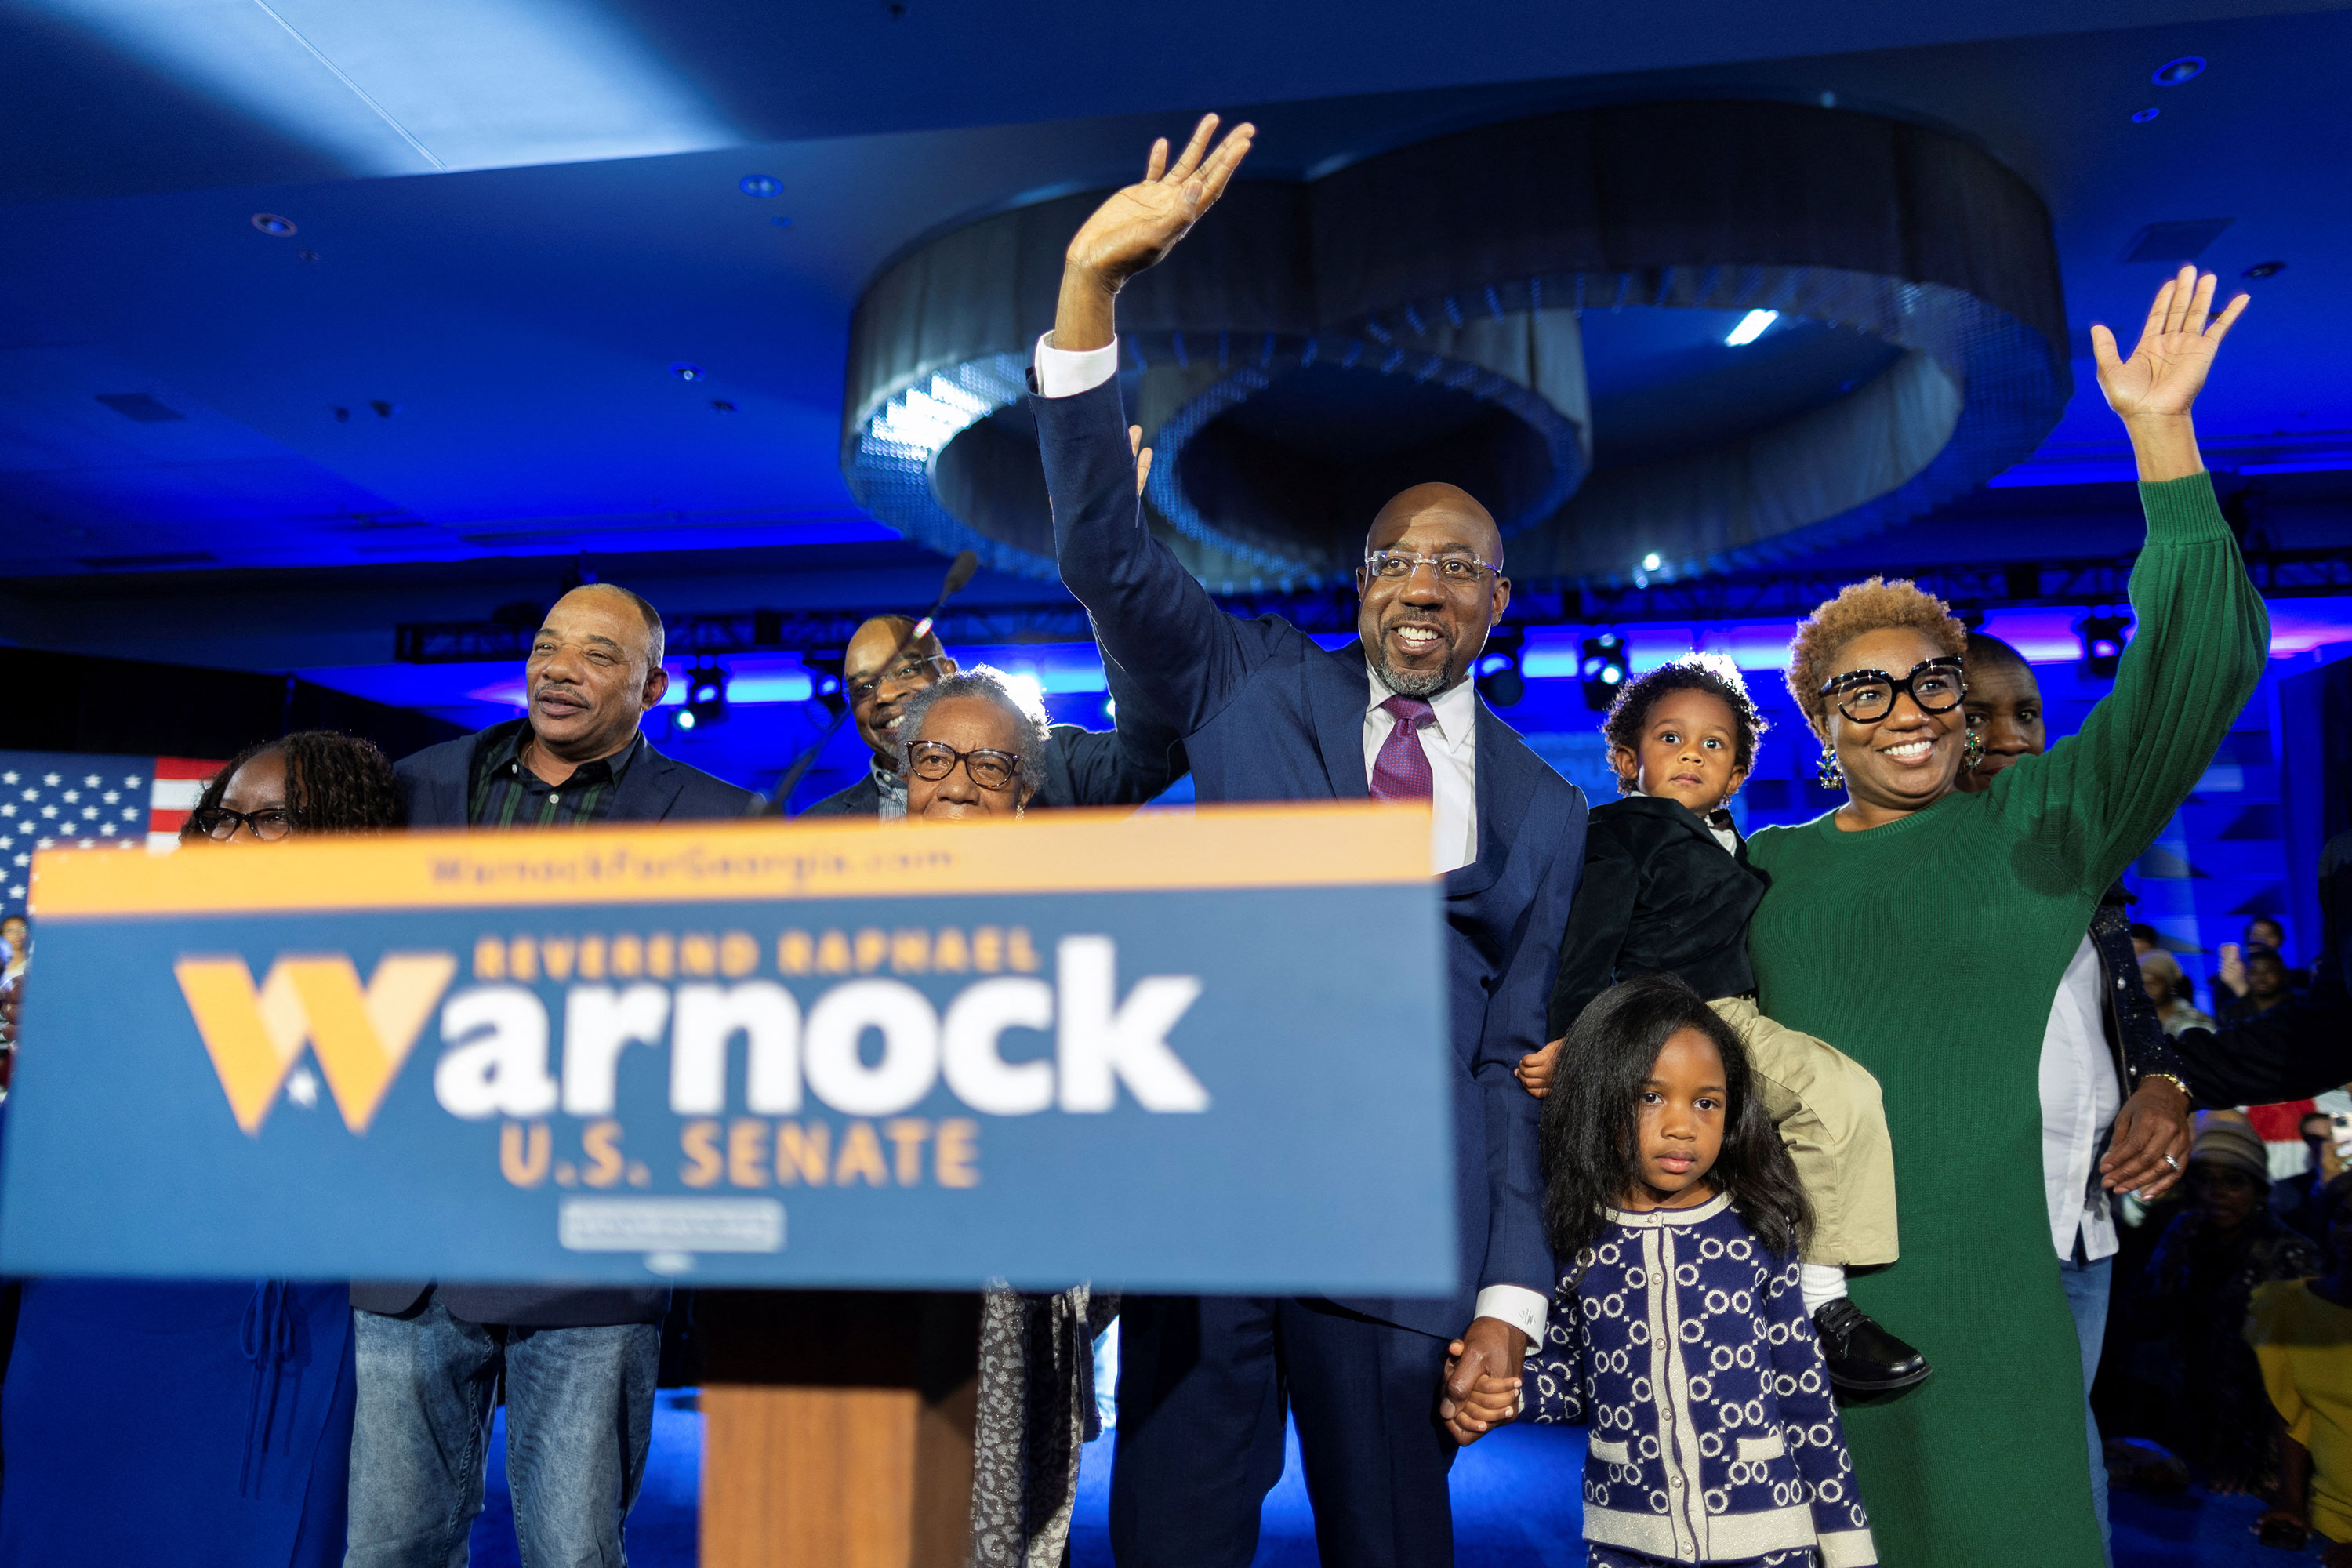 Sen. Raphael Warnock is joined on stage in Atlanta by his family after a projected win in the runoff election between Warnock and Herschel Walker.